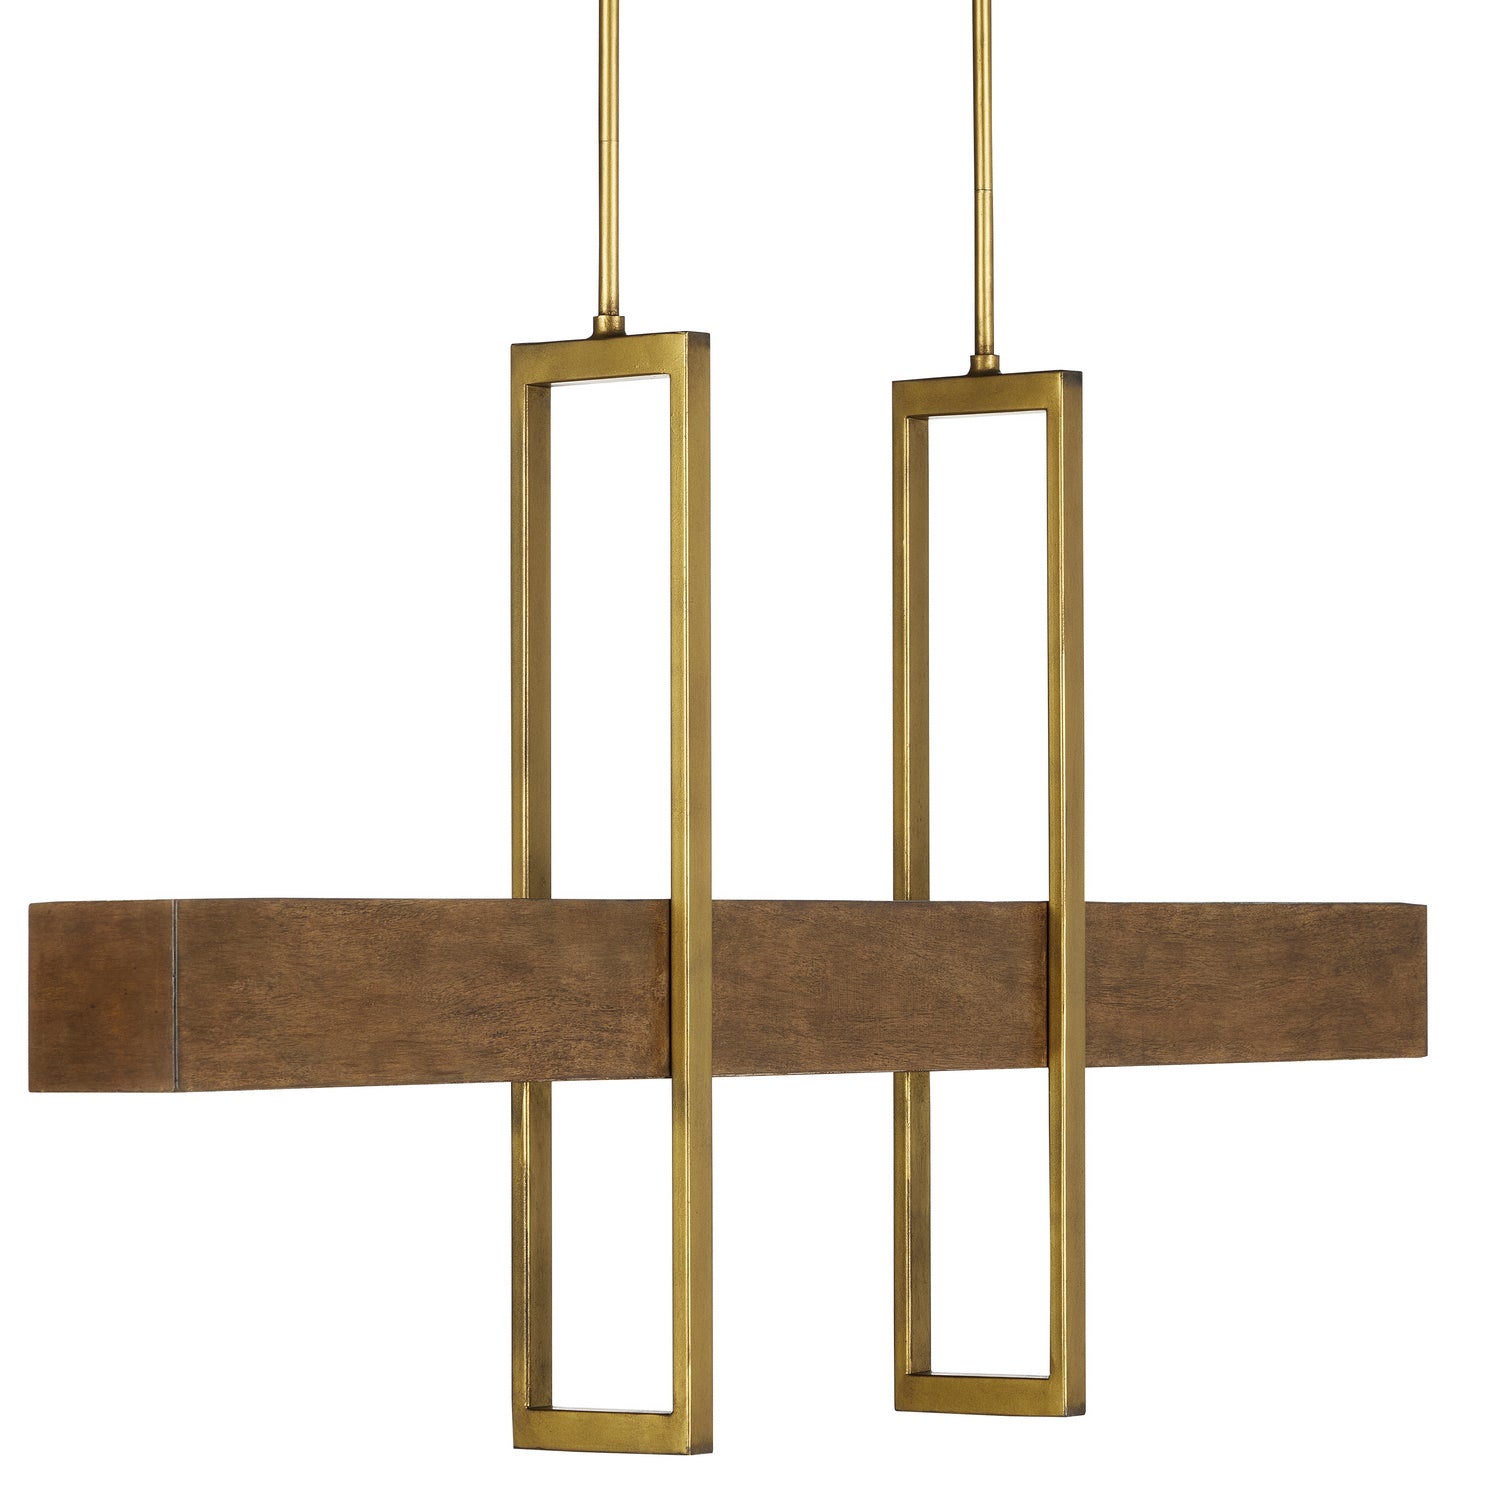 LED Linear Chandelier from the Tonbridge collection in Chestnut/Brass finish